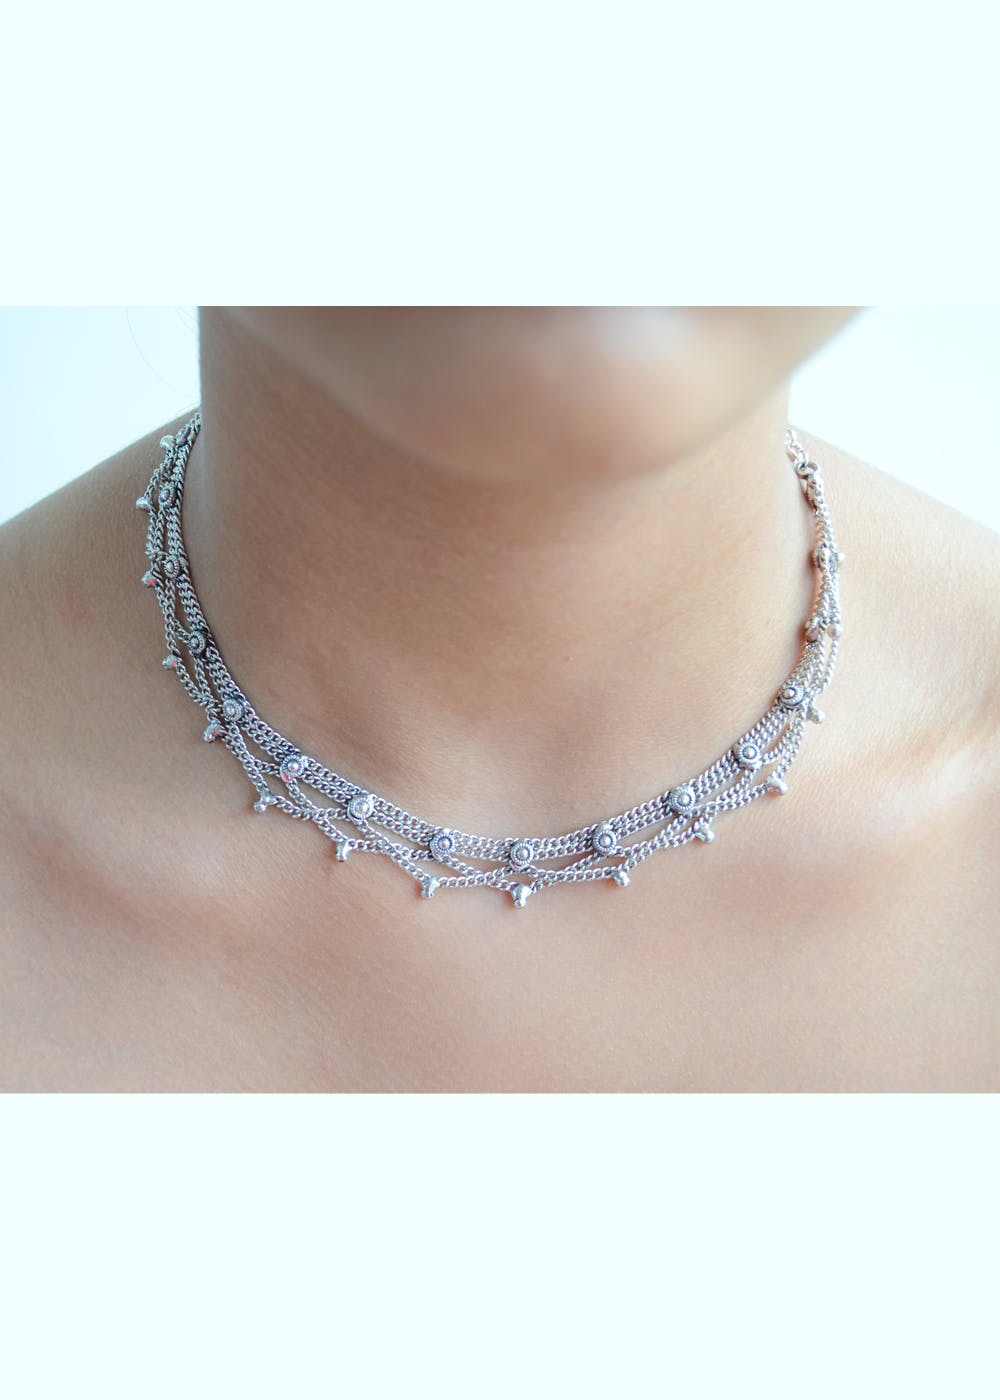 Crazytowear GERMAN SILVER CHOKER NECKLACE Black Silver Plated Sterling  Silver Choker Price in India - Buy Crazytowear GERMAN SILVER CHOKER NECKLACE  Black Silver Plated Sterling Silver Choker Online at Best Prices in